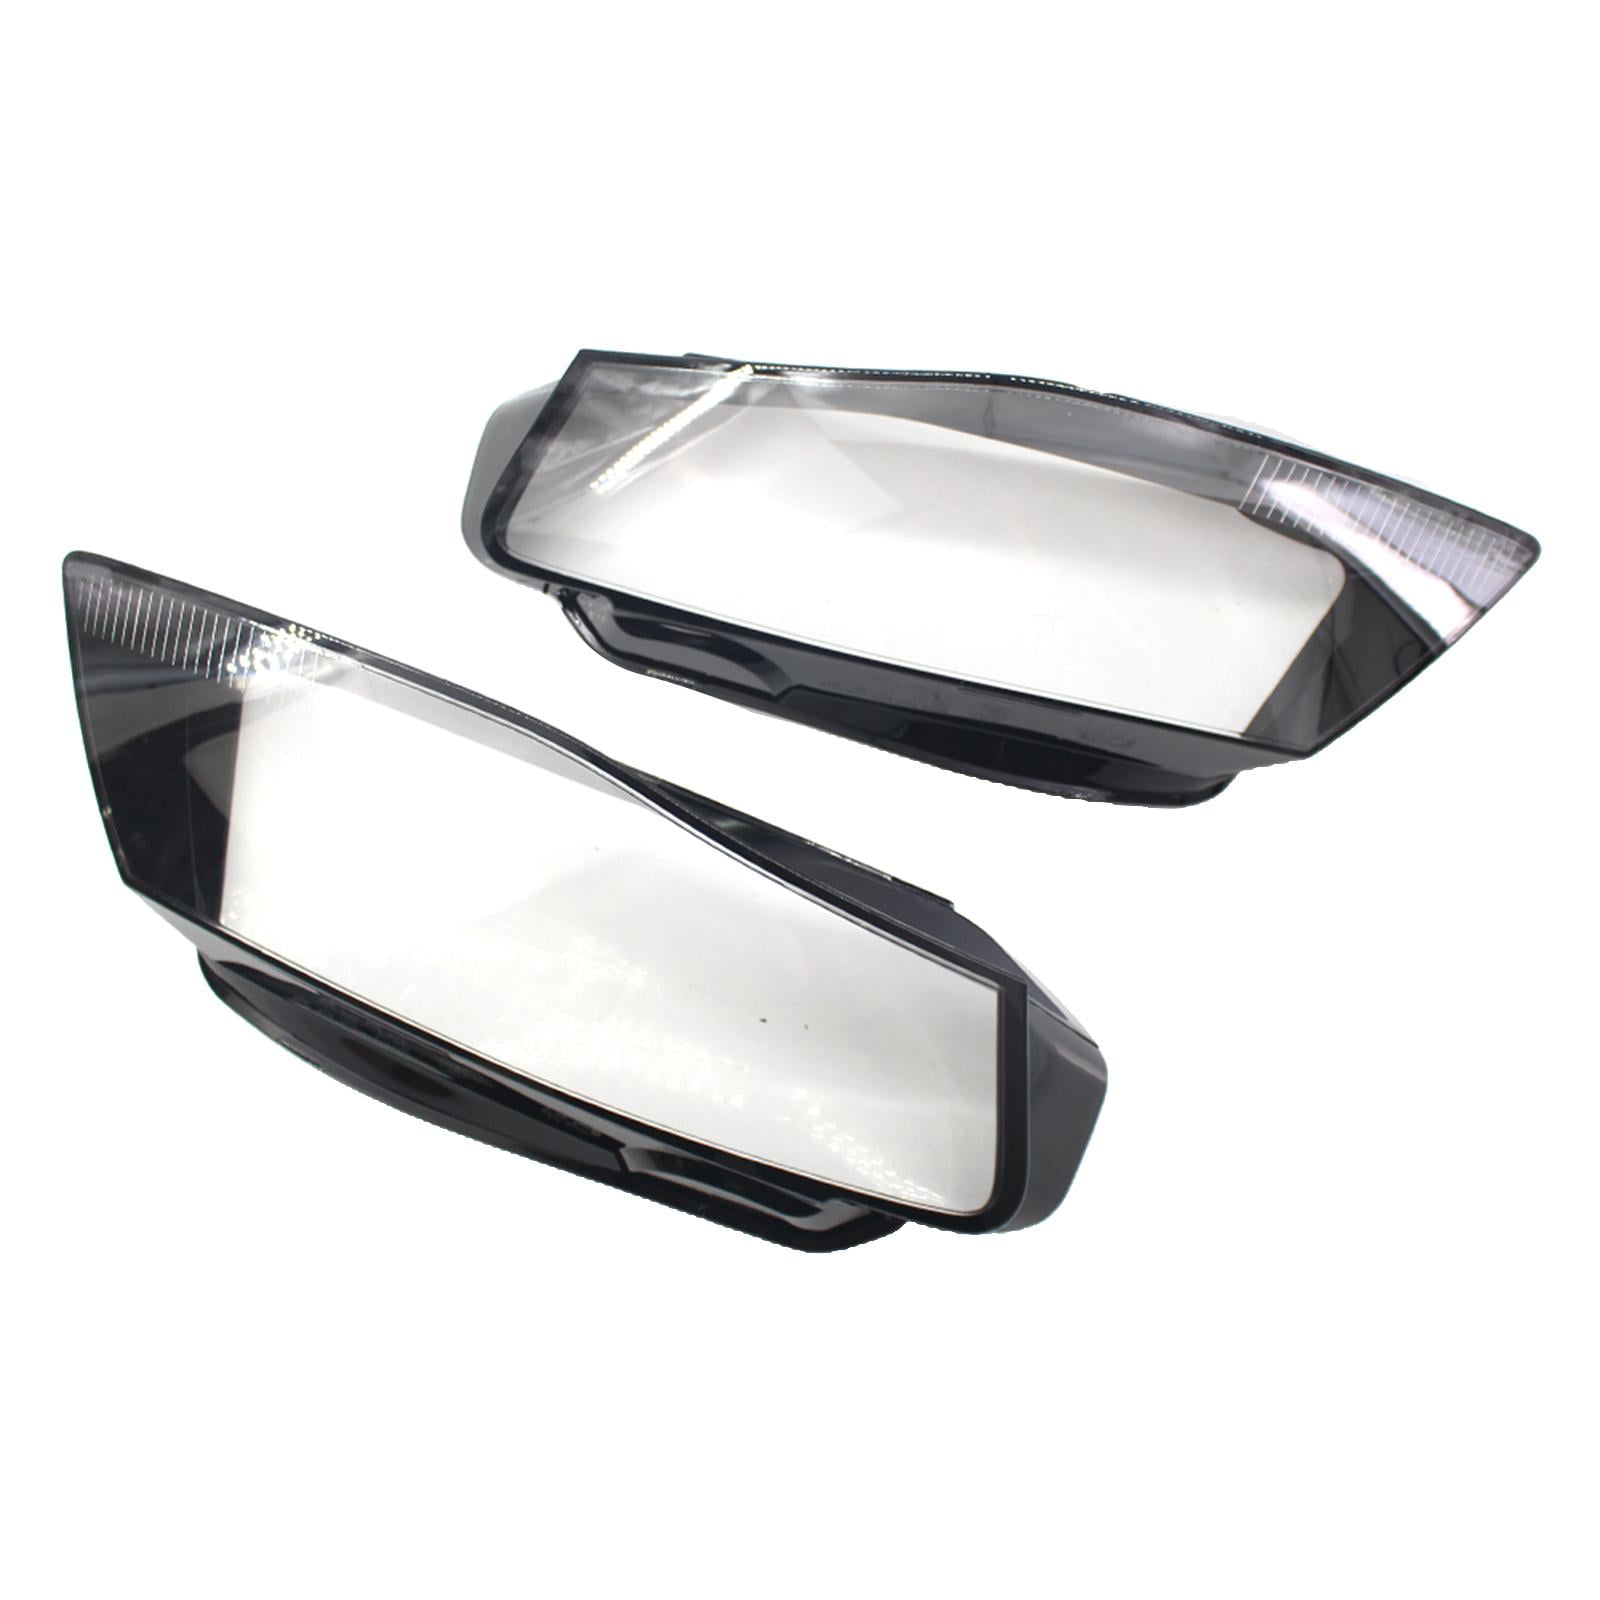 glue Audi A4 2009-2012 B8 Left and Right Front Kit Cover Lens for Headlights 